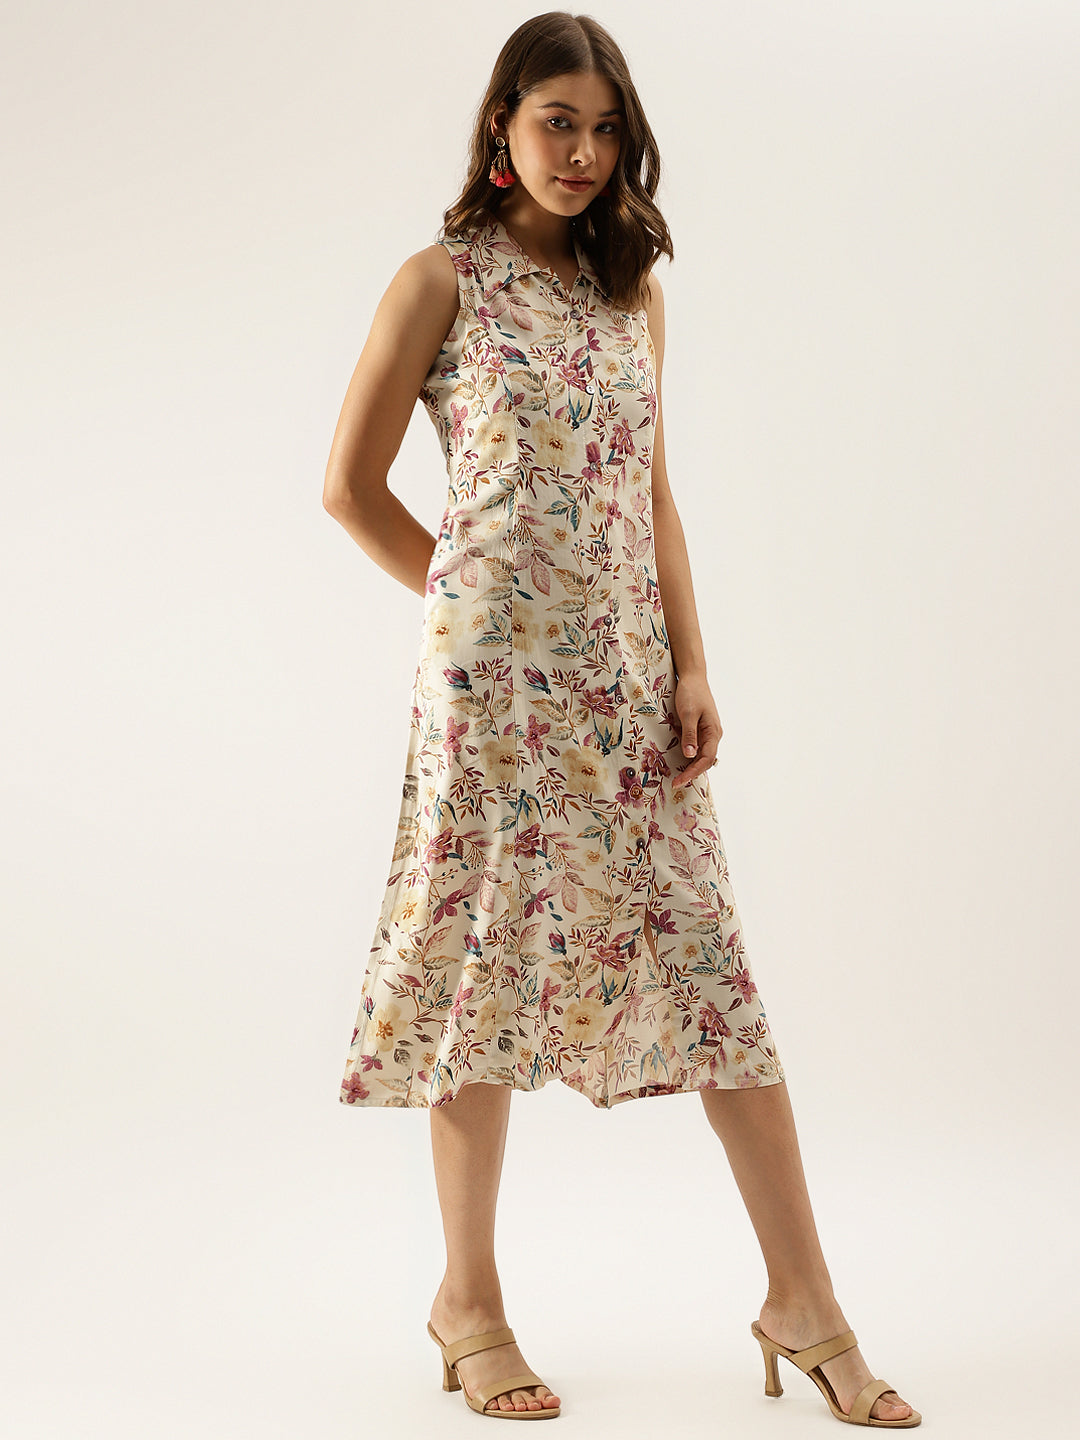 Cream Floral Printed Rayon Midi Dress with attached Sleeves